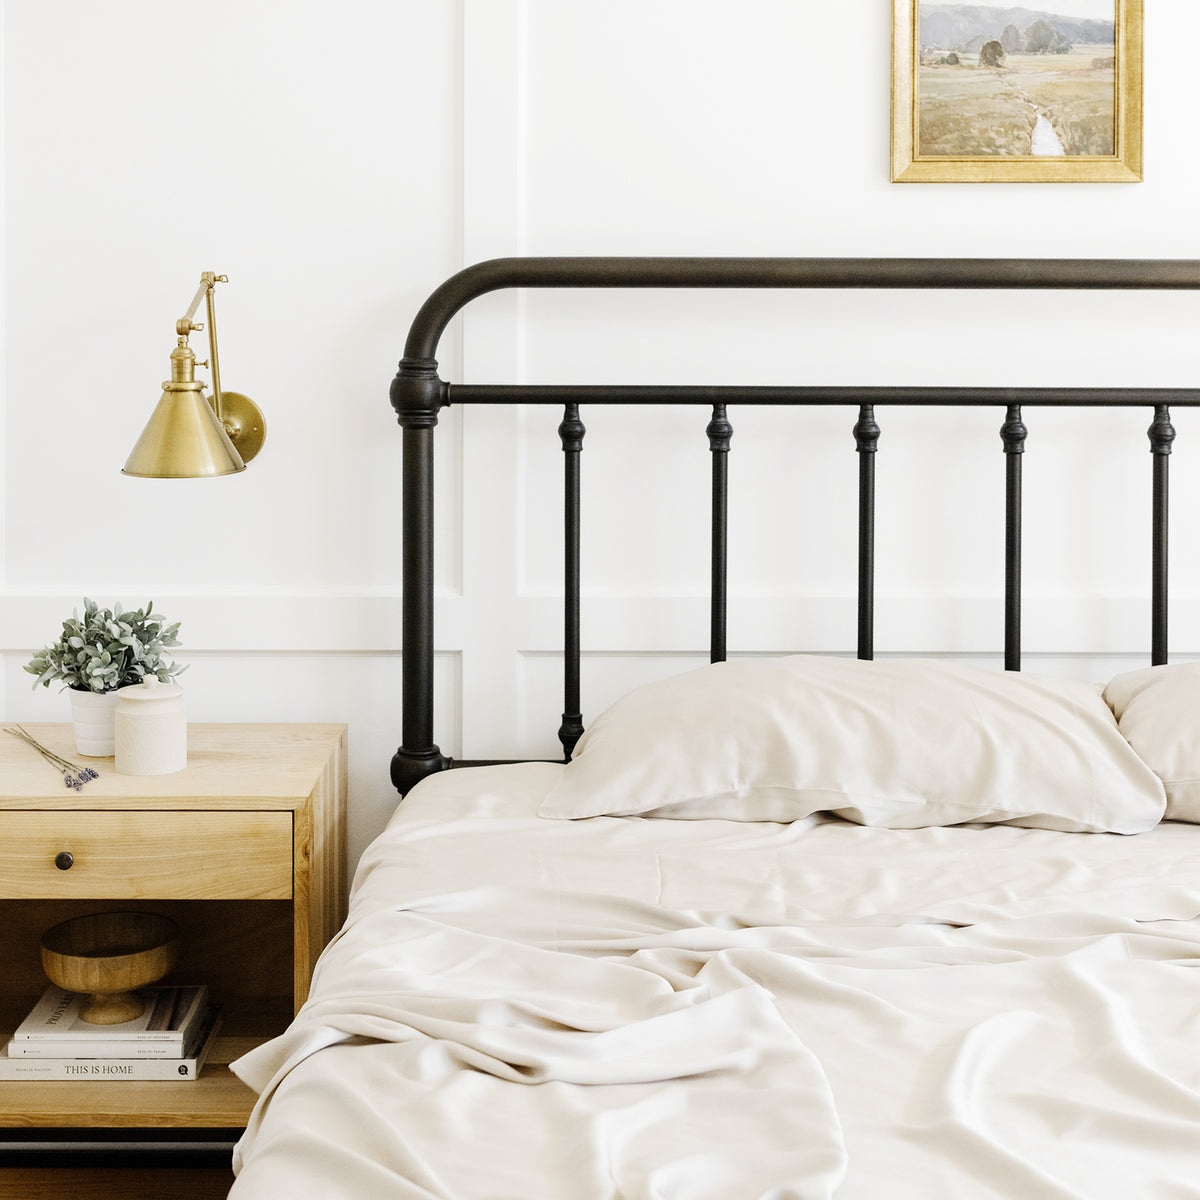 Bed with cream-colored sheets